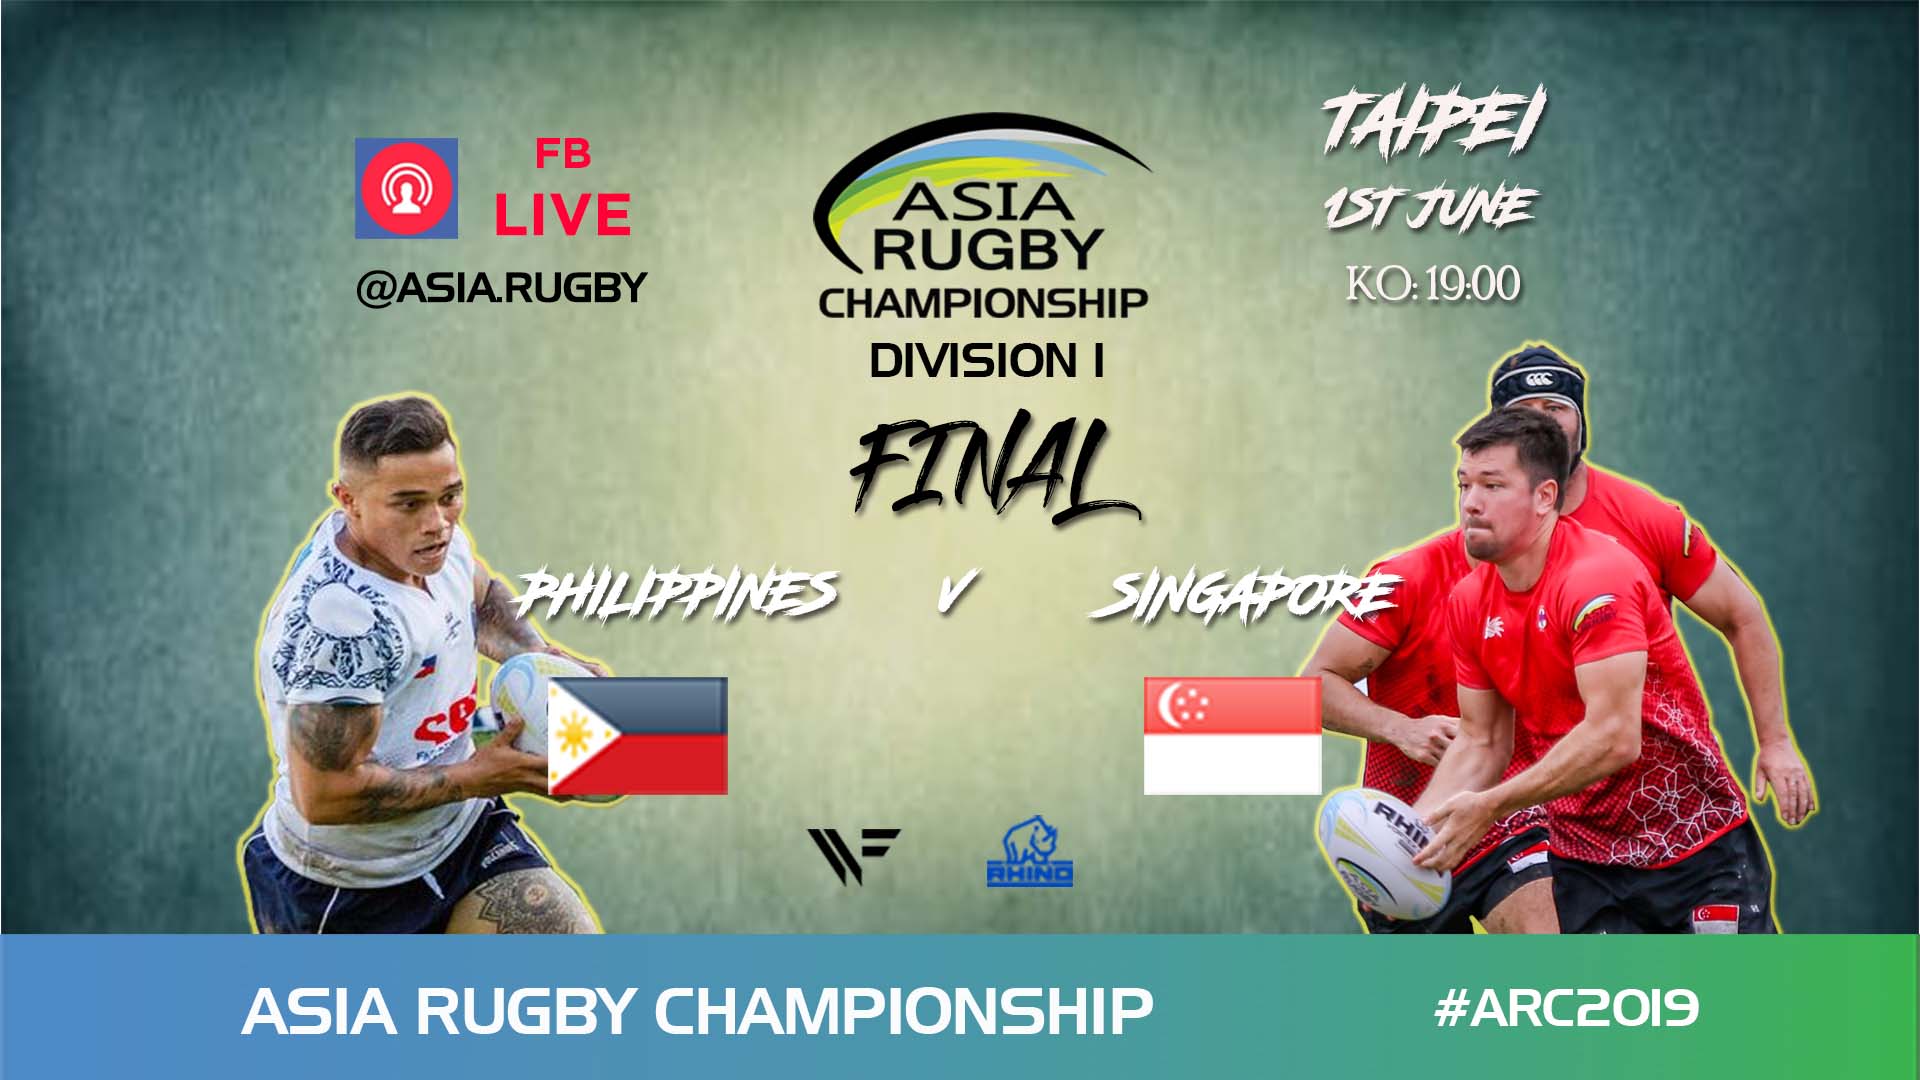 Live Streaming Final Philippines v Singapore